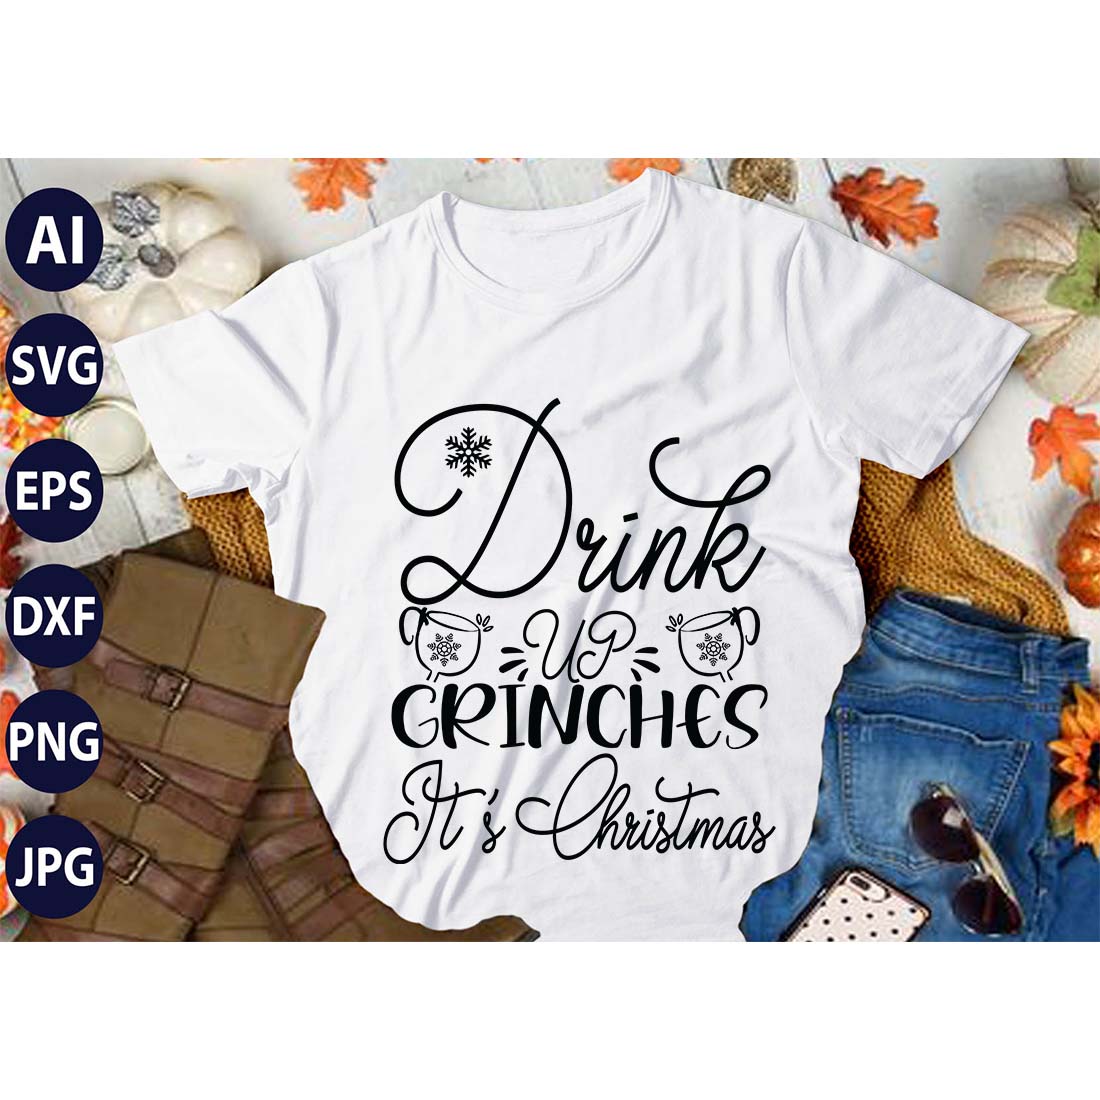 Drink UP Grenache It's Christmas, SVG T-Shirt Design |Christmas Retro It's All About Jesus Typography T-shirt Design | Ai, Svg, Eps, Dxf, Jpeg, Png, Instant download T-Shirt | 100% print-ready Digital vector file preview image.